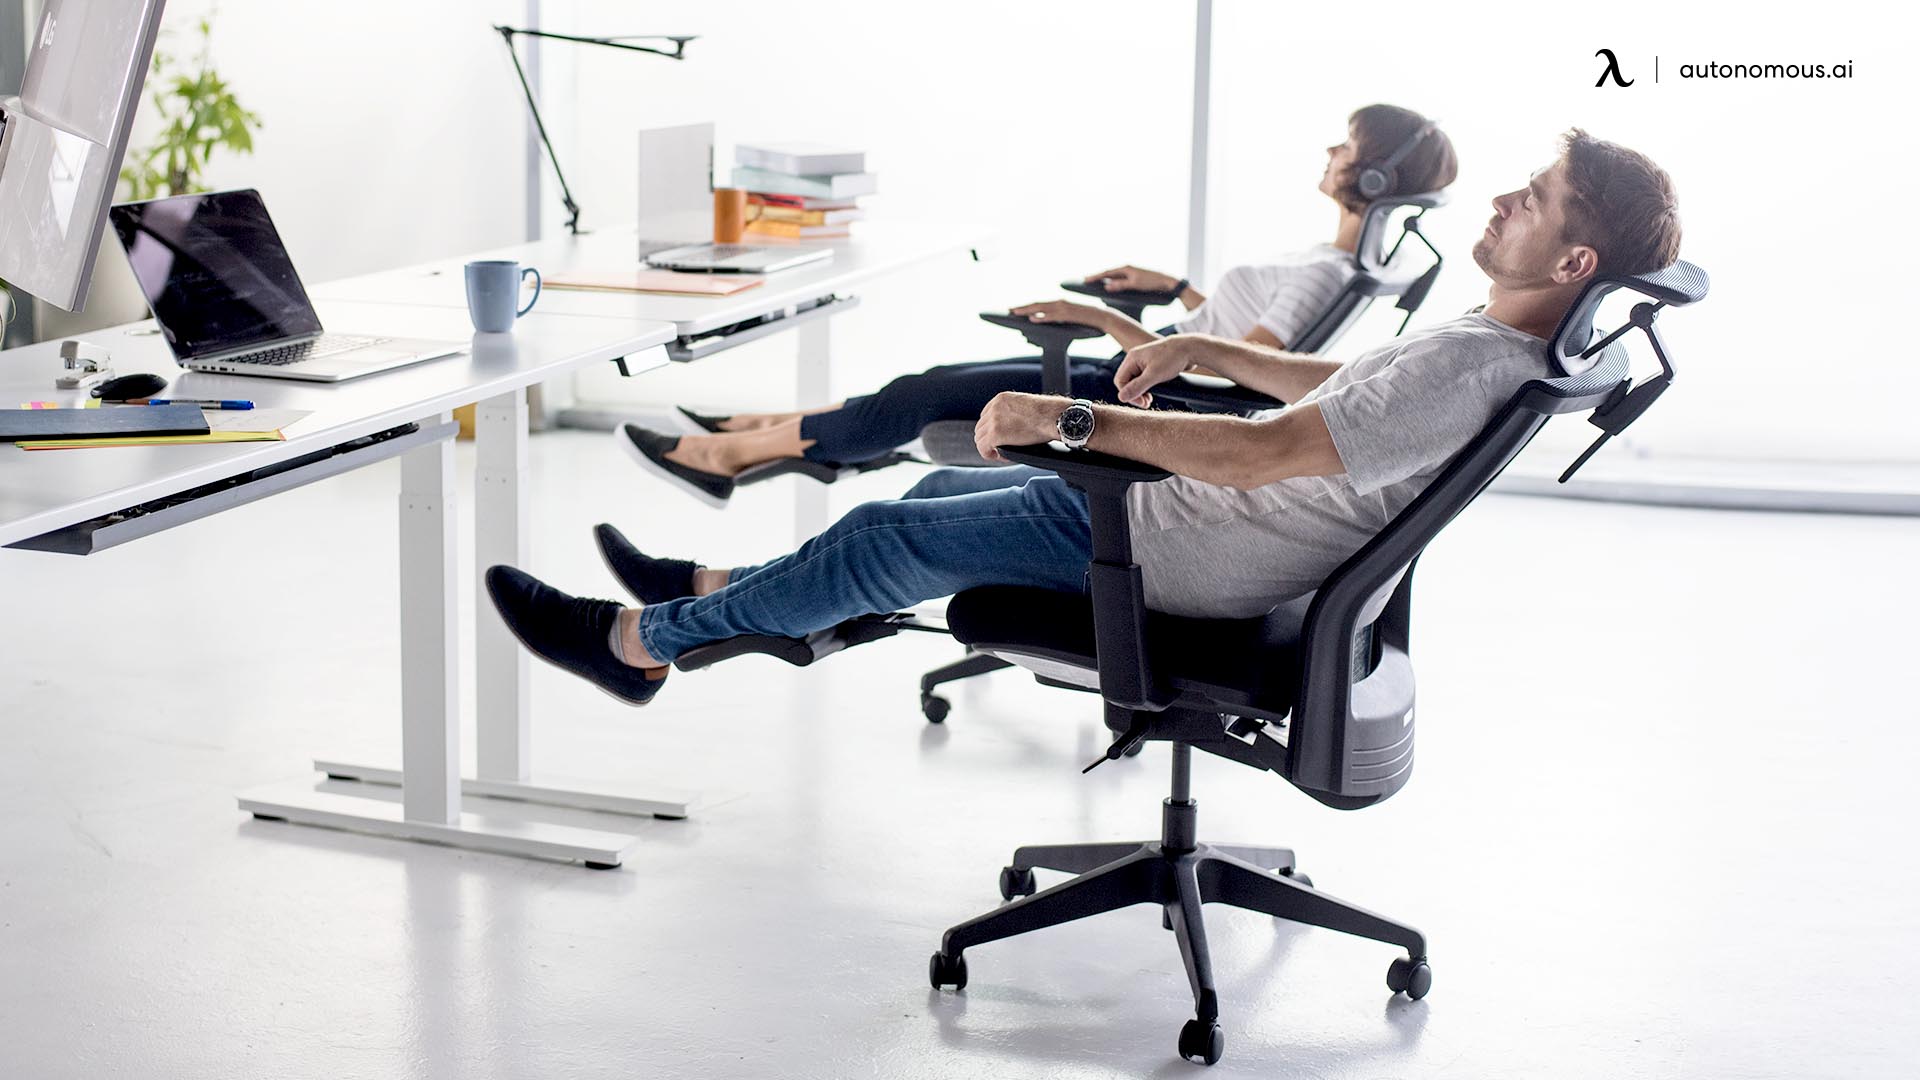 10 Best Choices for a Computer Chair with Headrest of 2022